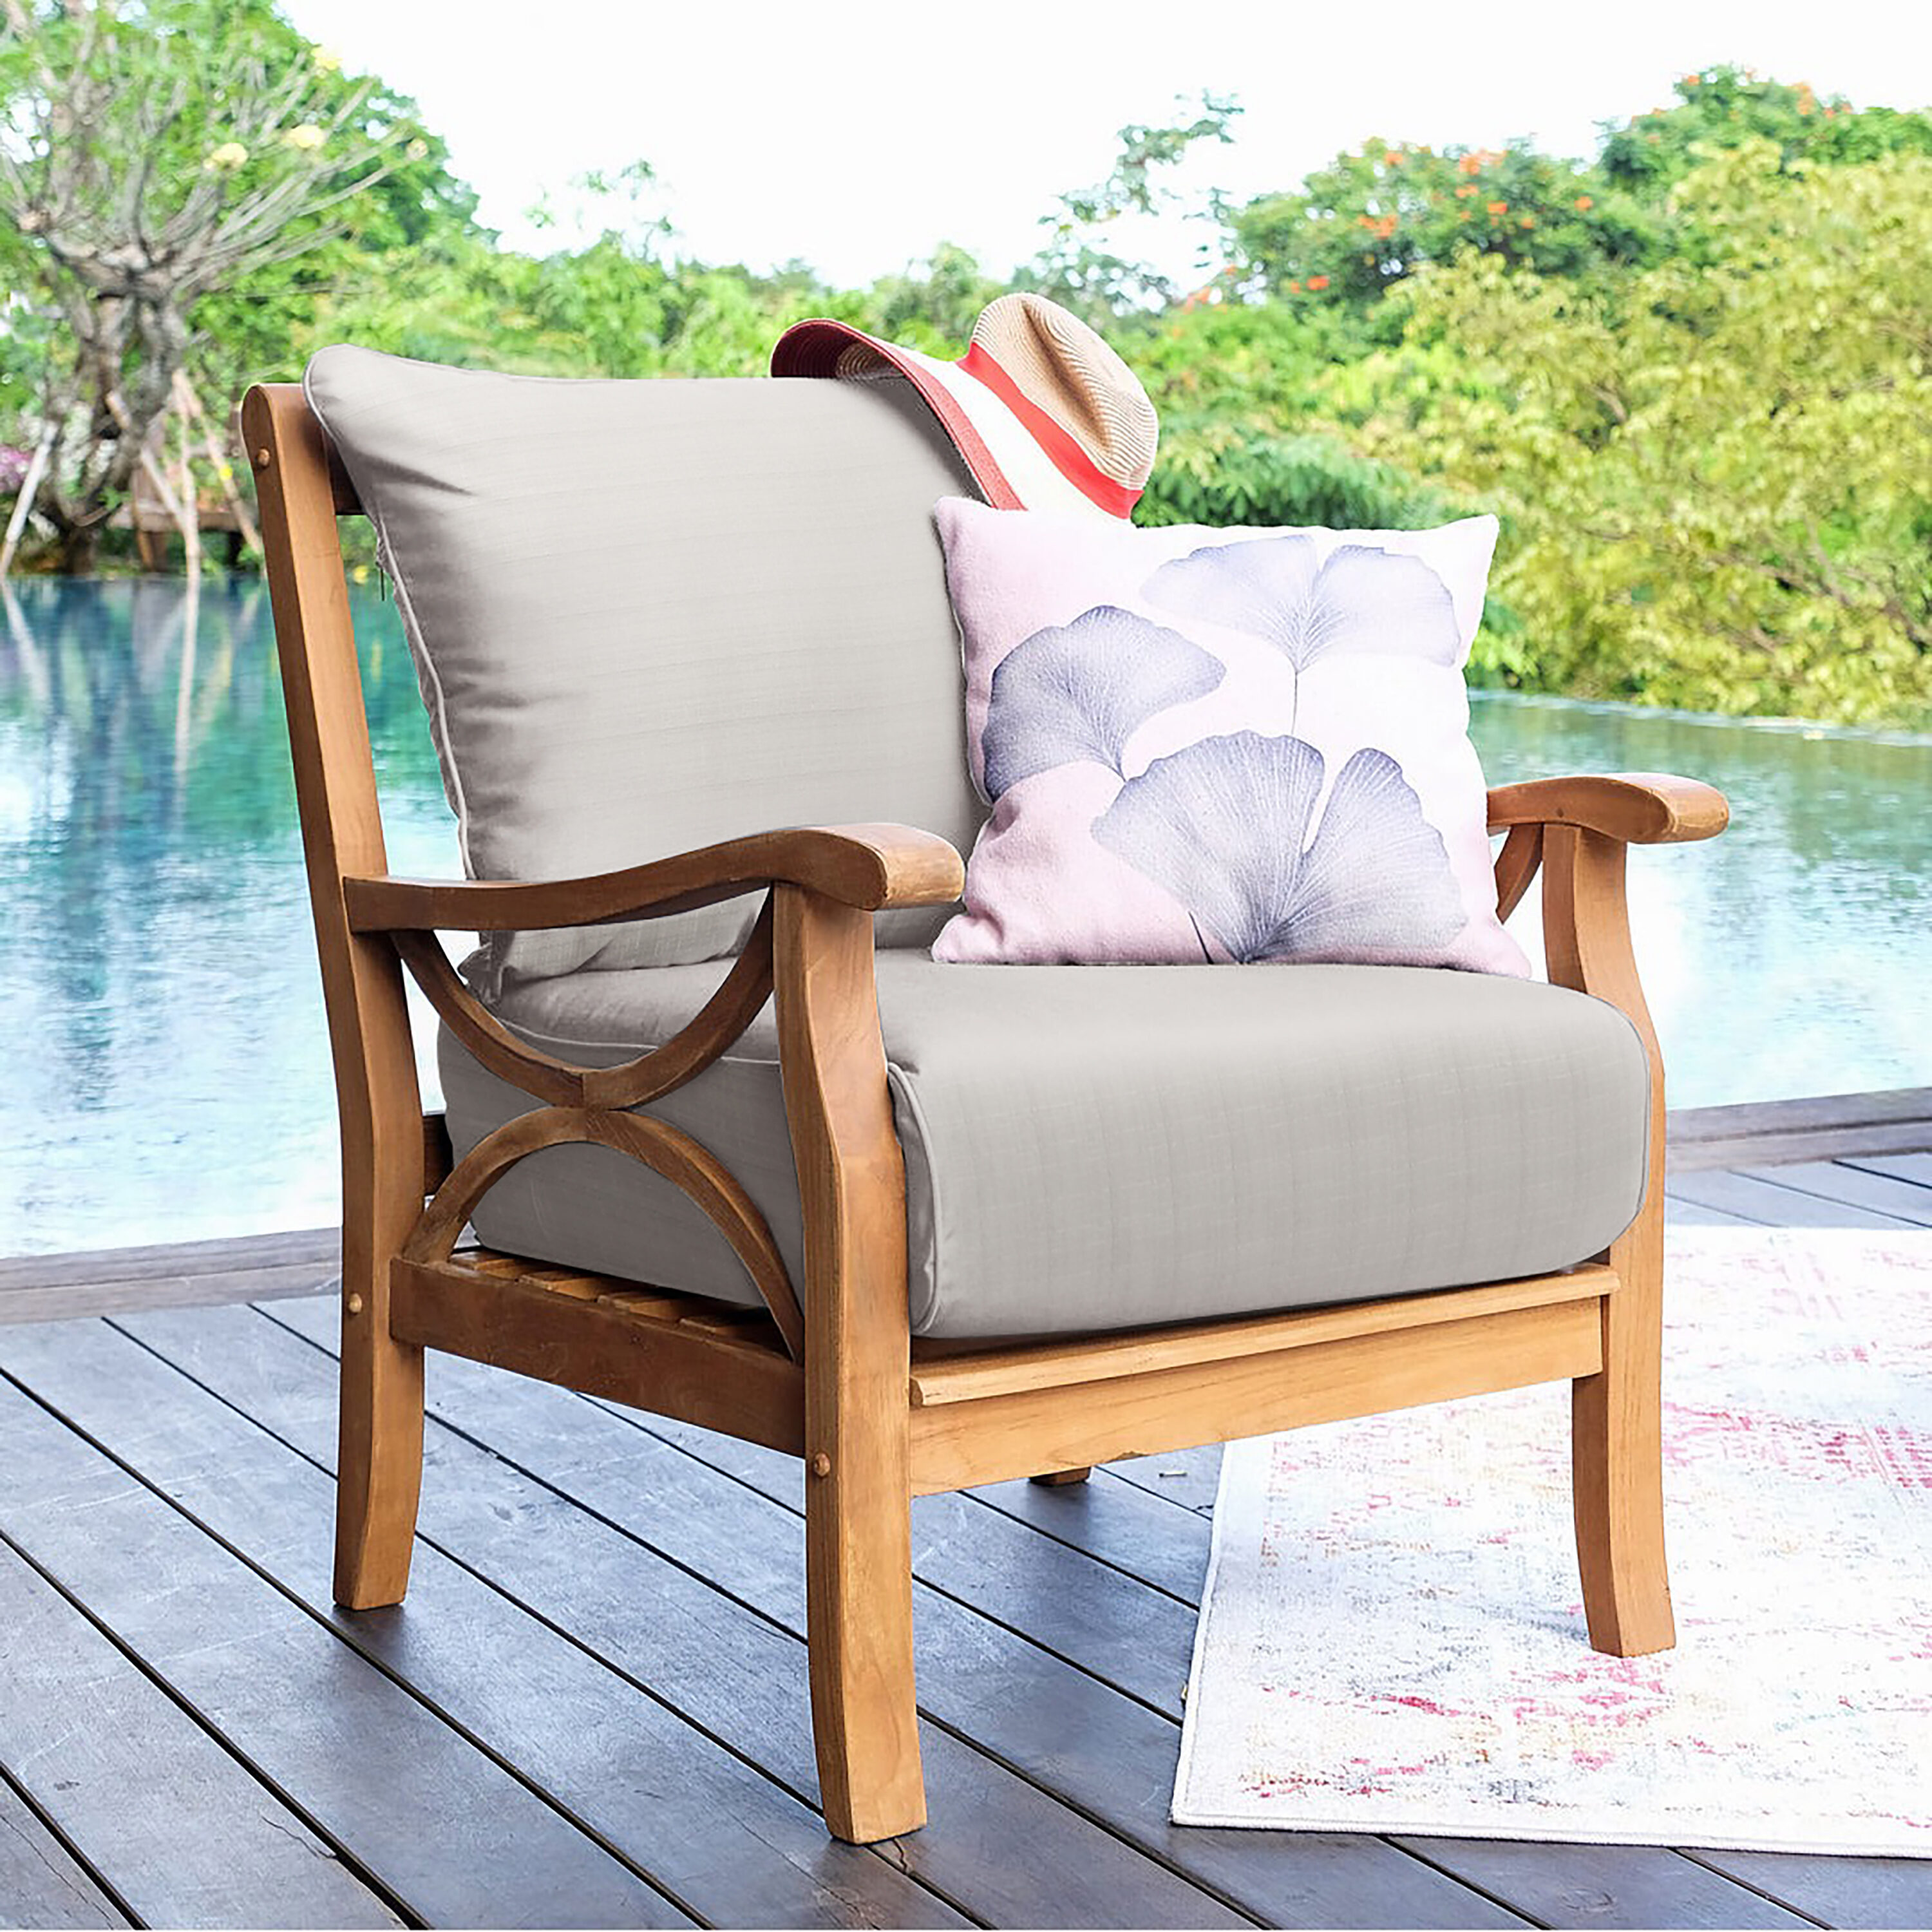 Cambridge Casual Auburn Unfinished Wood Solid Teak Outdoor Lounge Chair - Free Lumbar Pillow